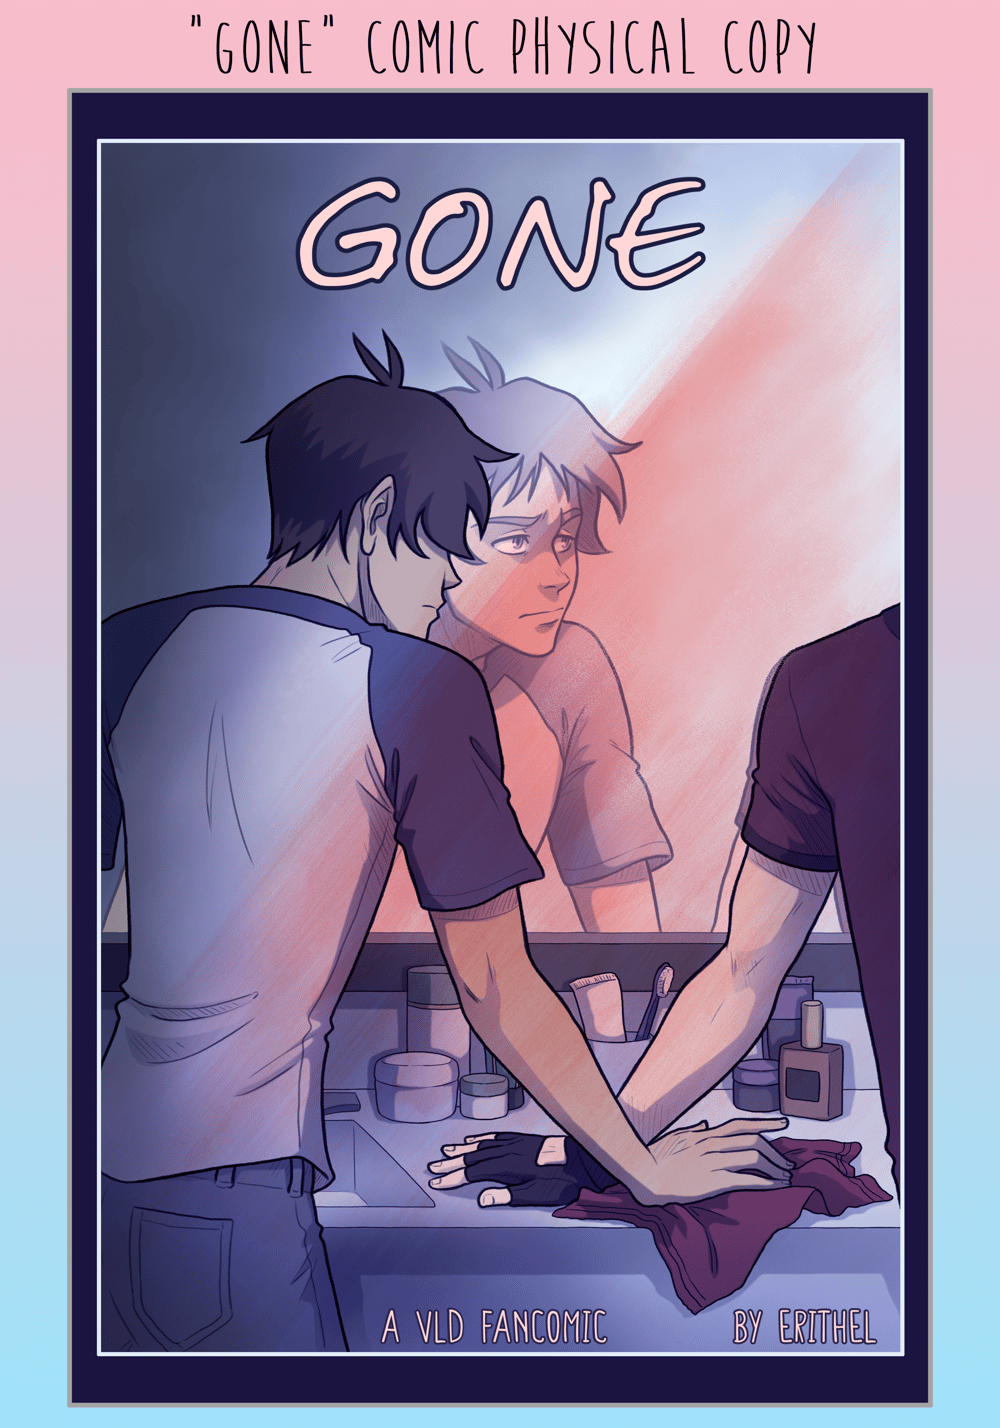 Image of Gone Comic (Physical Copy)